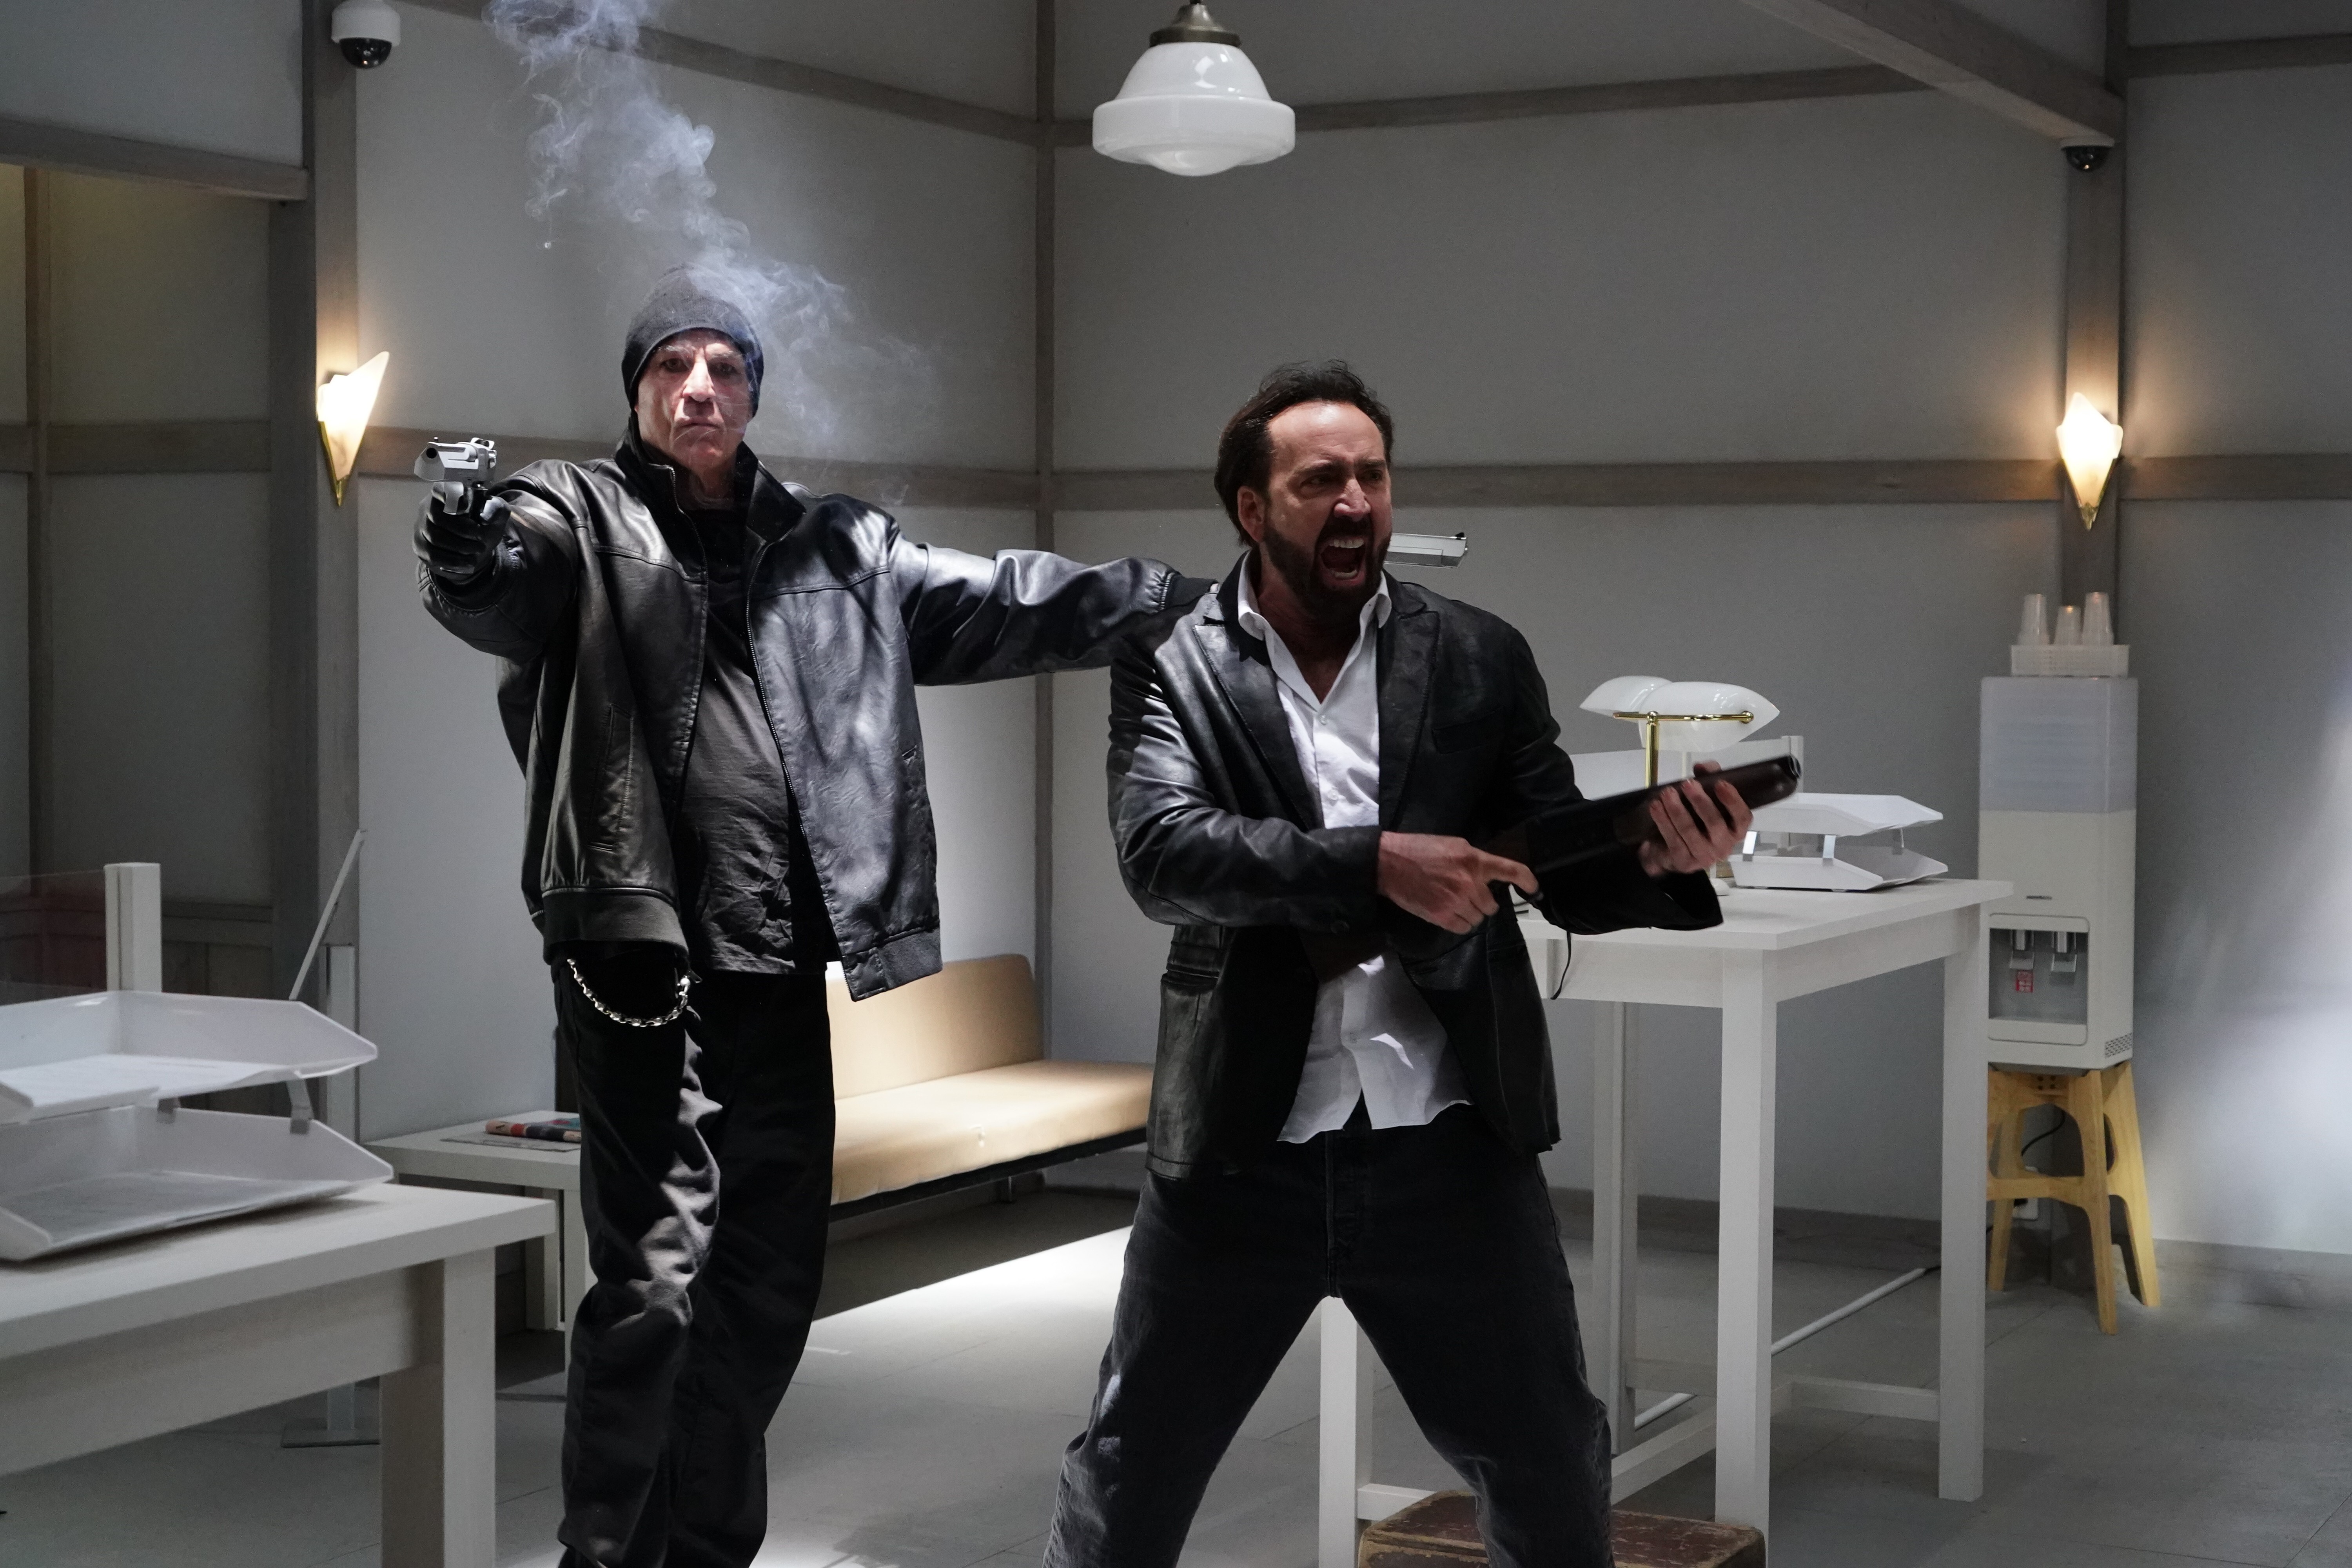 Nicolas Cage (right) as Hero and Nick Cassavetes as Psycho in a still from Prisoners of the Ghostland, directed by Japan’s Sion Sono, which had its premiere this week at the Sundance Film Festival. Photo: courtesy of XYZ Films